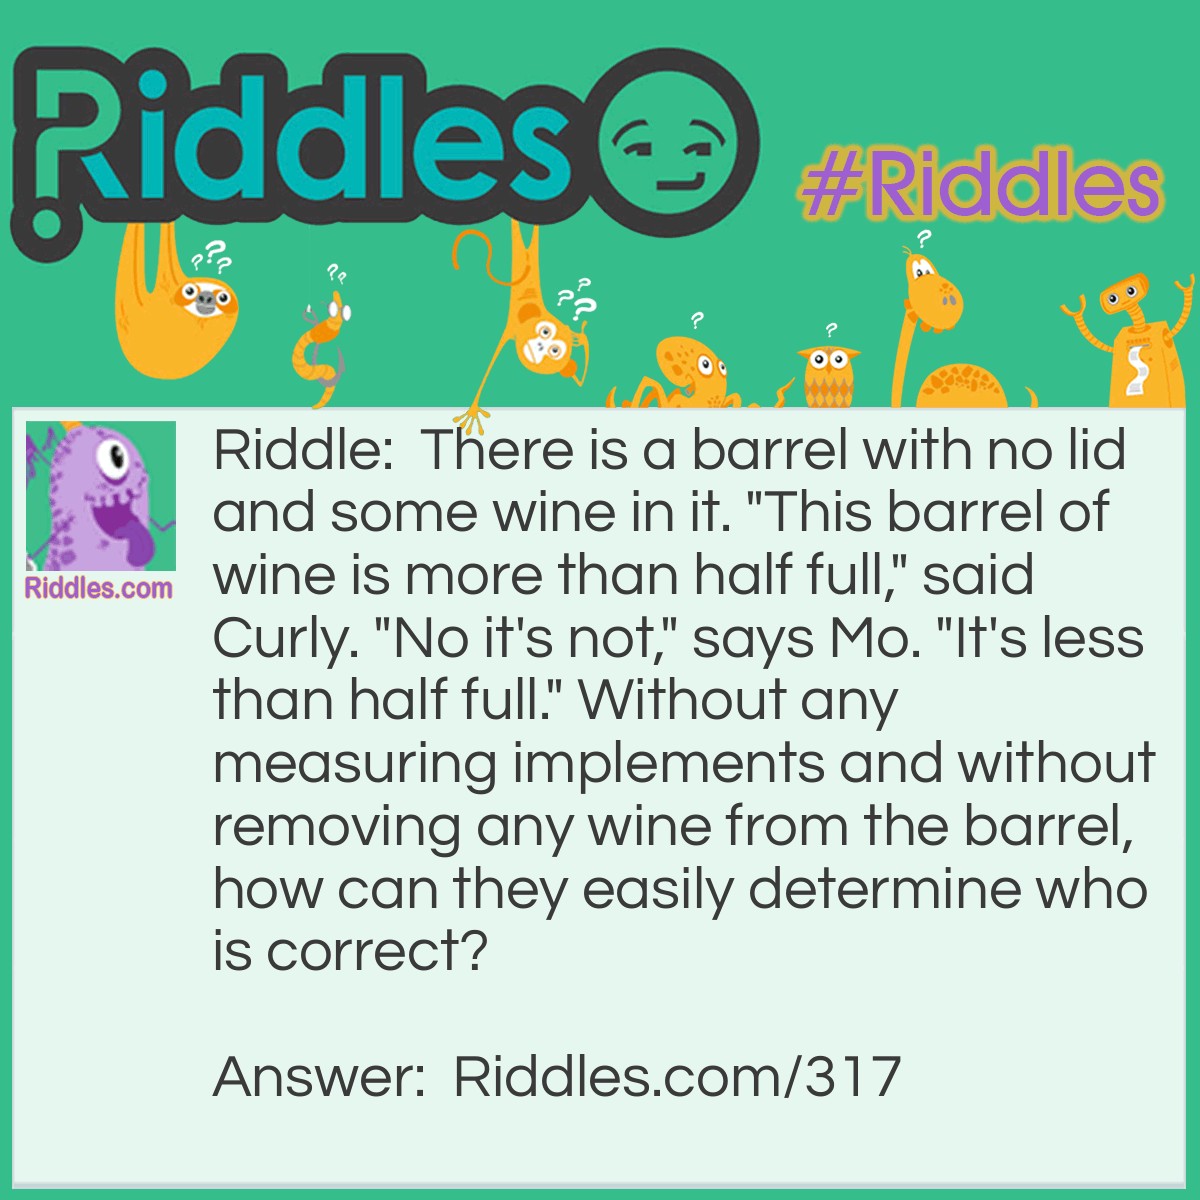 Riddle: There is a barrel with no lid and some wine in it. "This barrel of wine is more than half full," said Curly. "No it's not," says Mo. "It's less than half full." Without any measuring implements and without removing any wine from the barrel, how can they easily determine who is correct? Answer: Tilt the barrel until the wine barely touches the lip of the barrel. If the bottom of the barrel is visible then it is less than half full. If the barrel bottom is still completely covered by the wine, then it is more than half full.